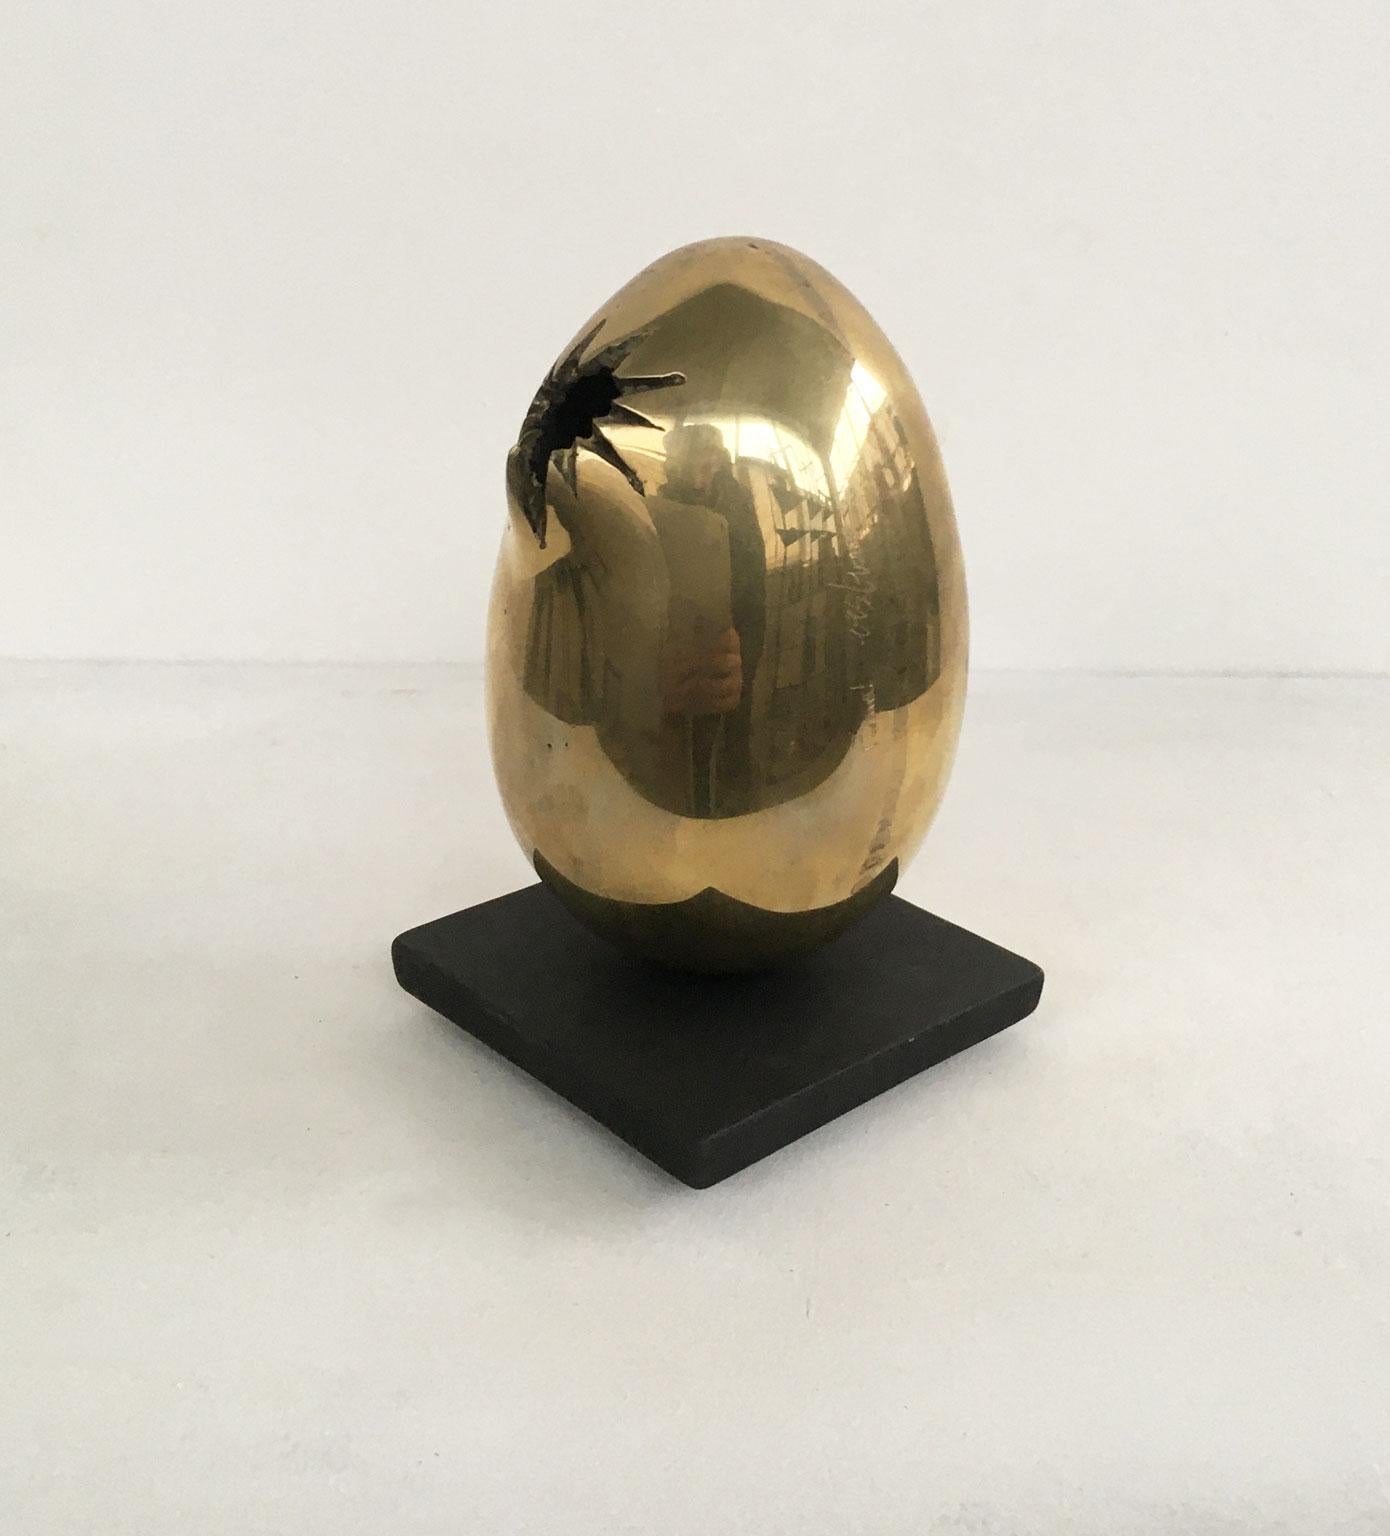 1978 Italy Bronze Abstract Sculpture by Fanna Roncoroni Forma Ovale Oval Shape For Sale 1